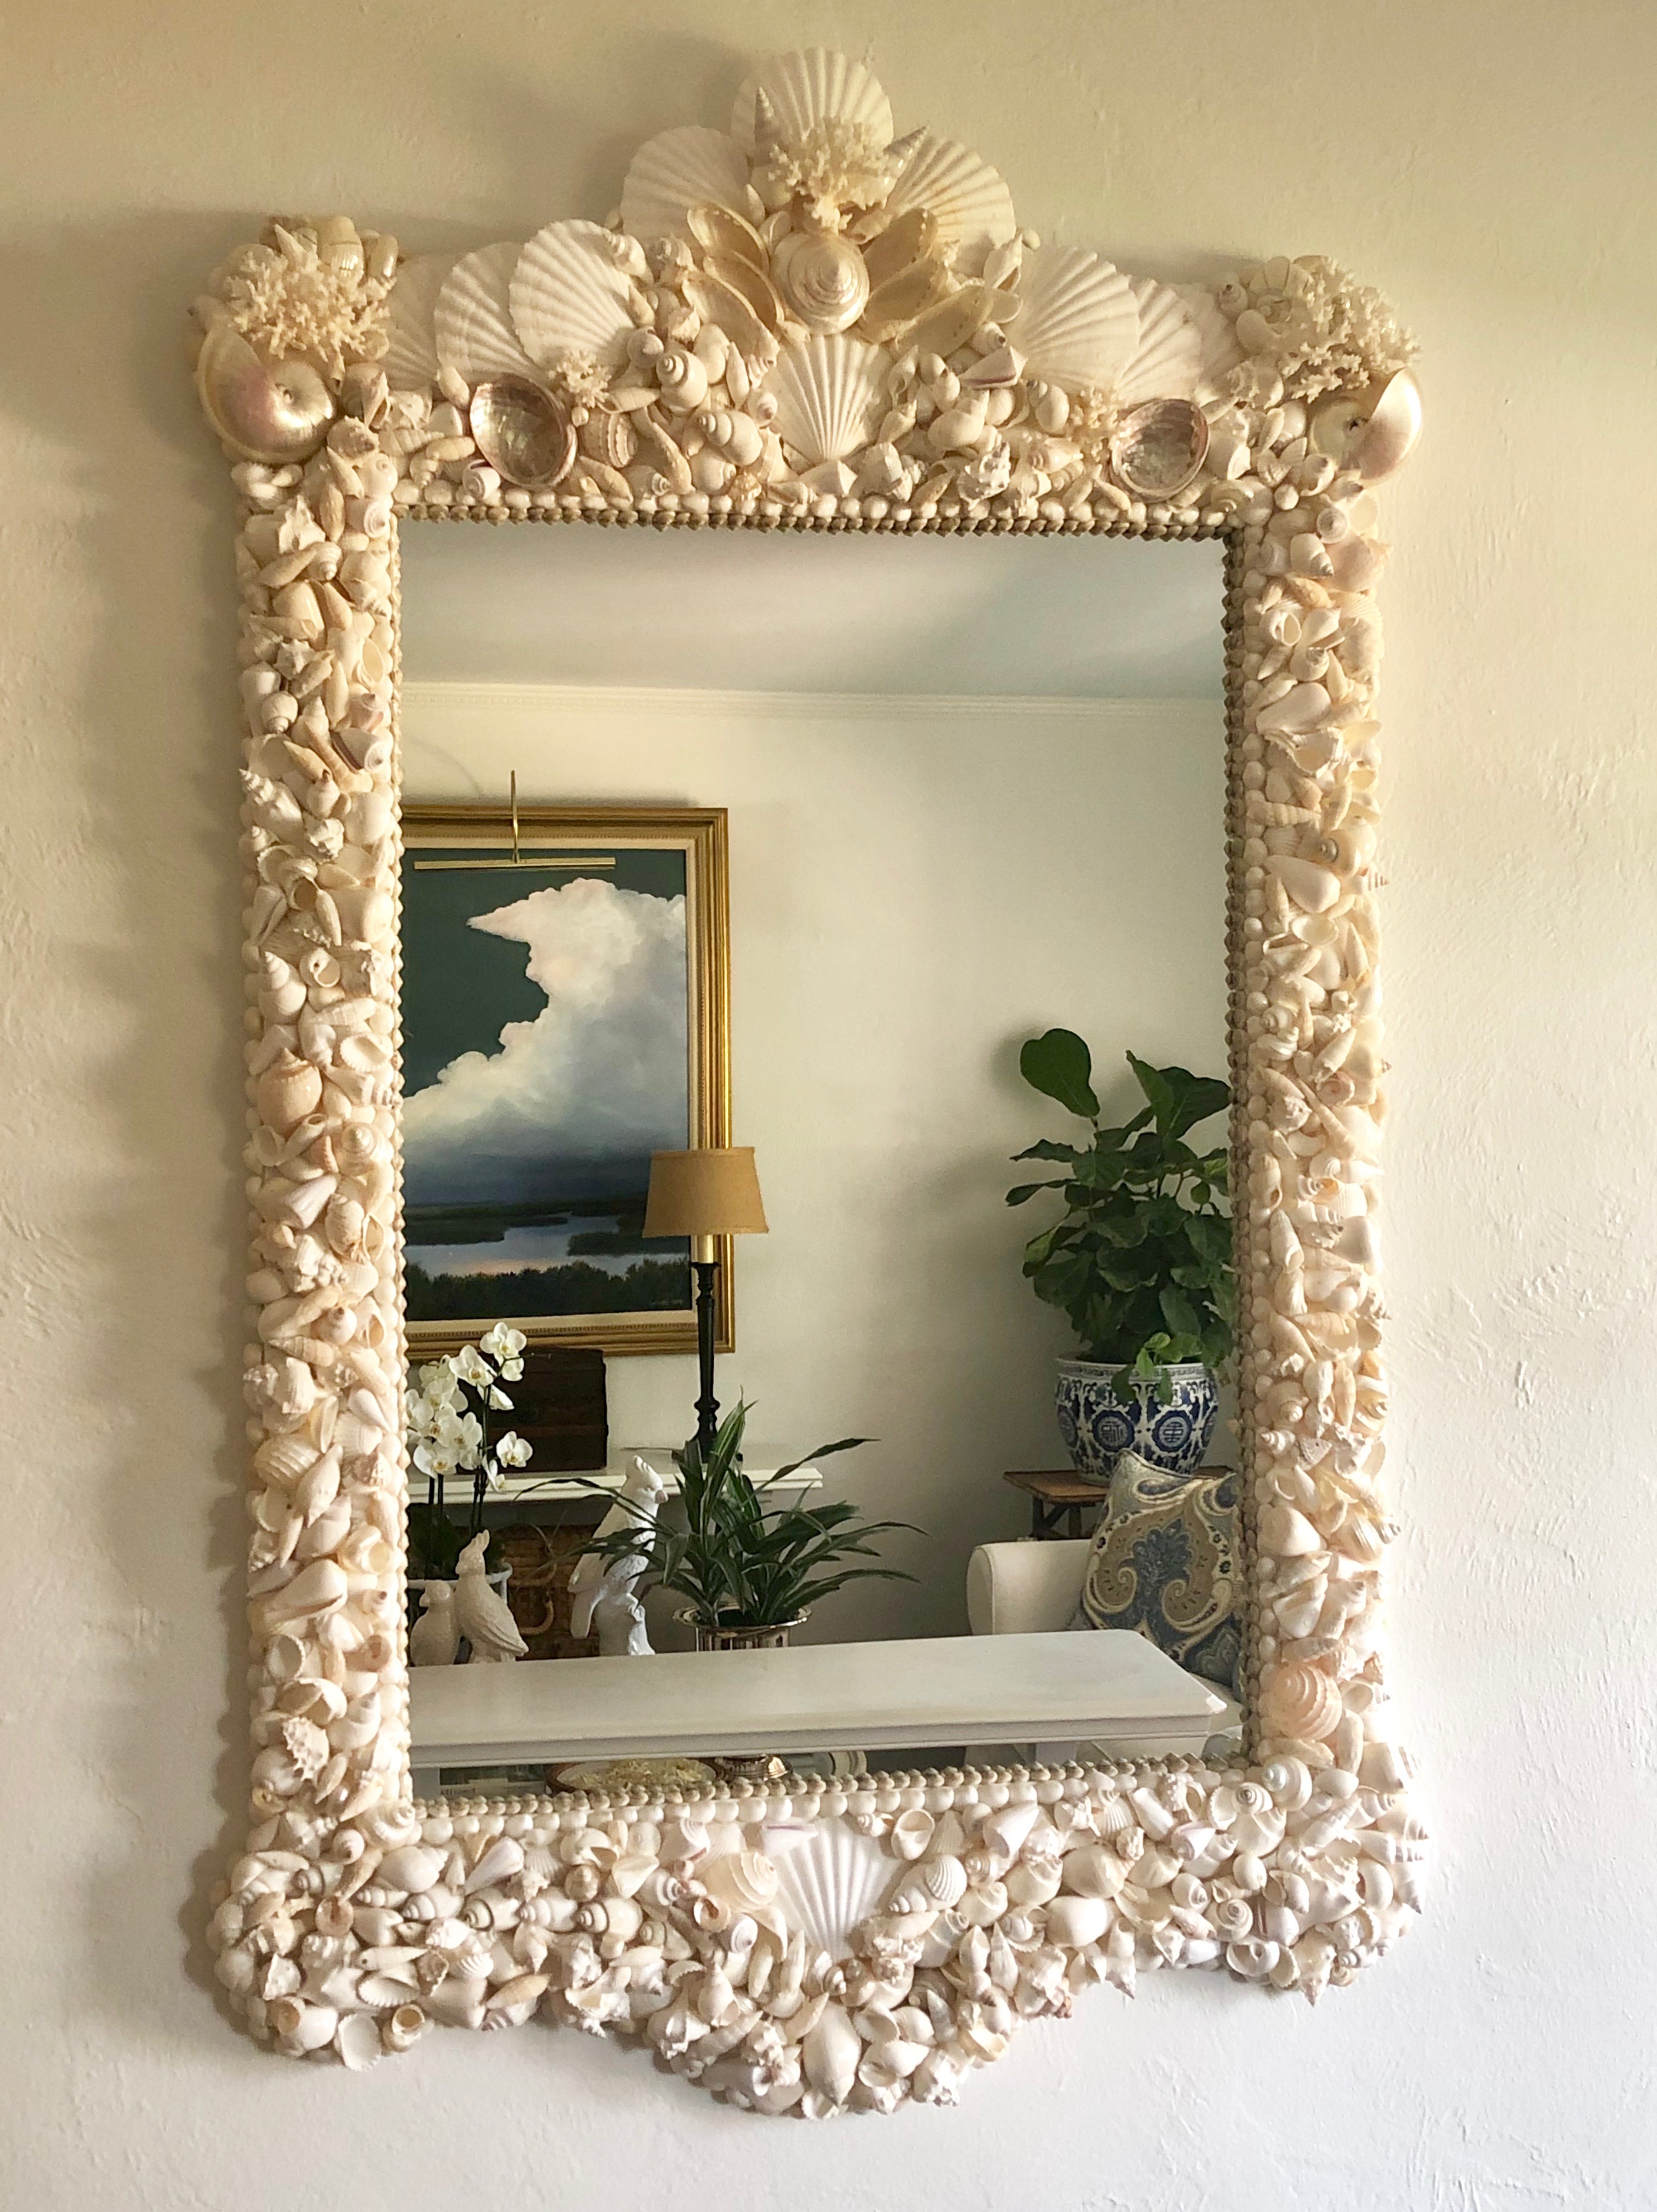 large mirror made with white sea shells reflecting a painting with a large white cloud.